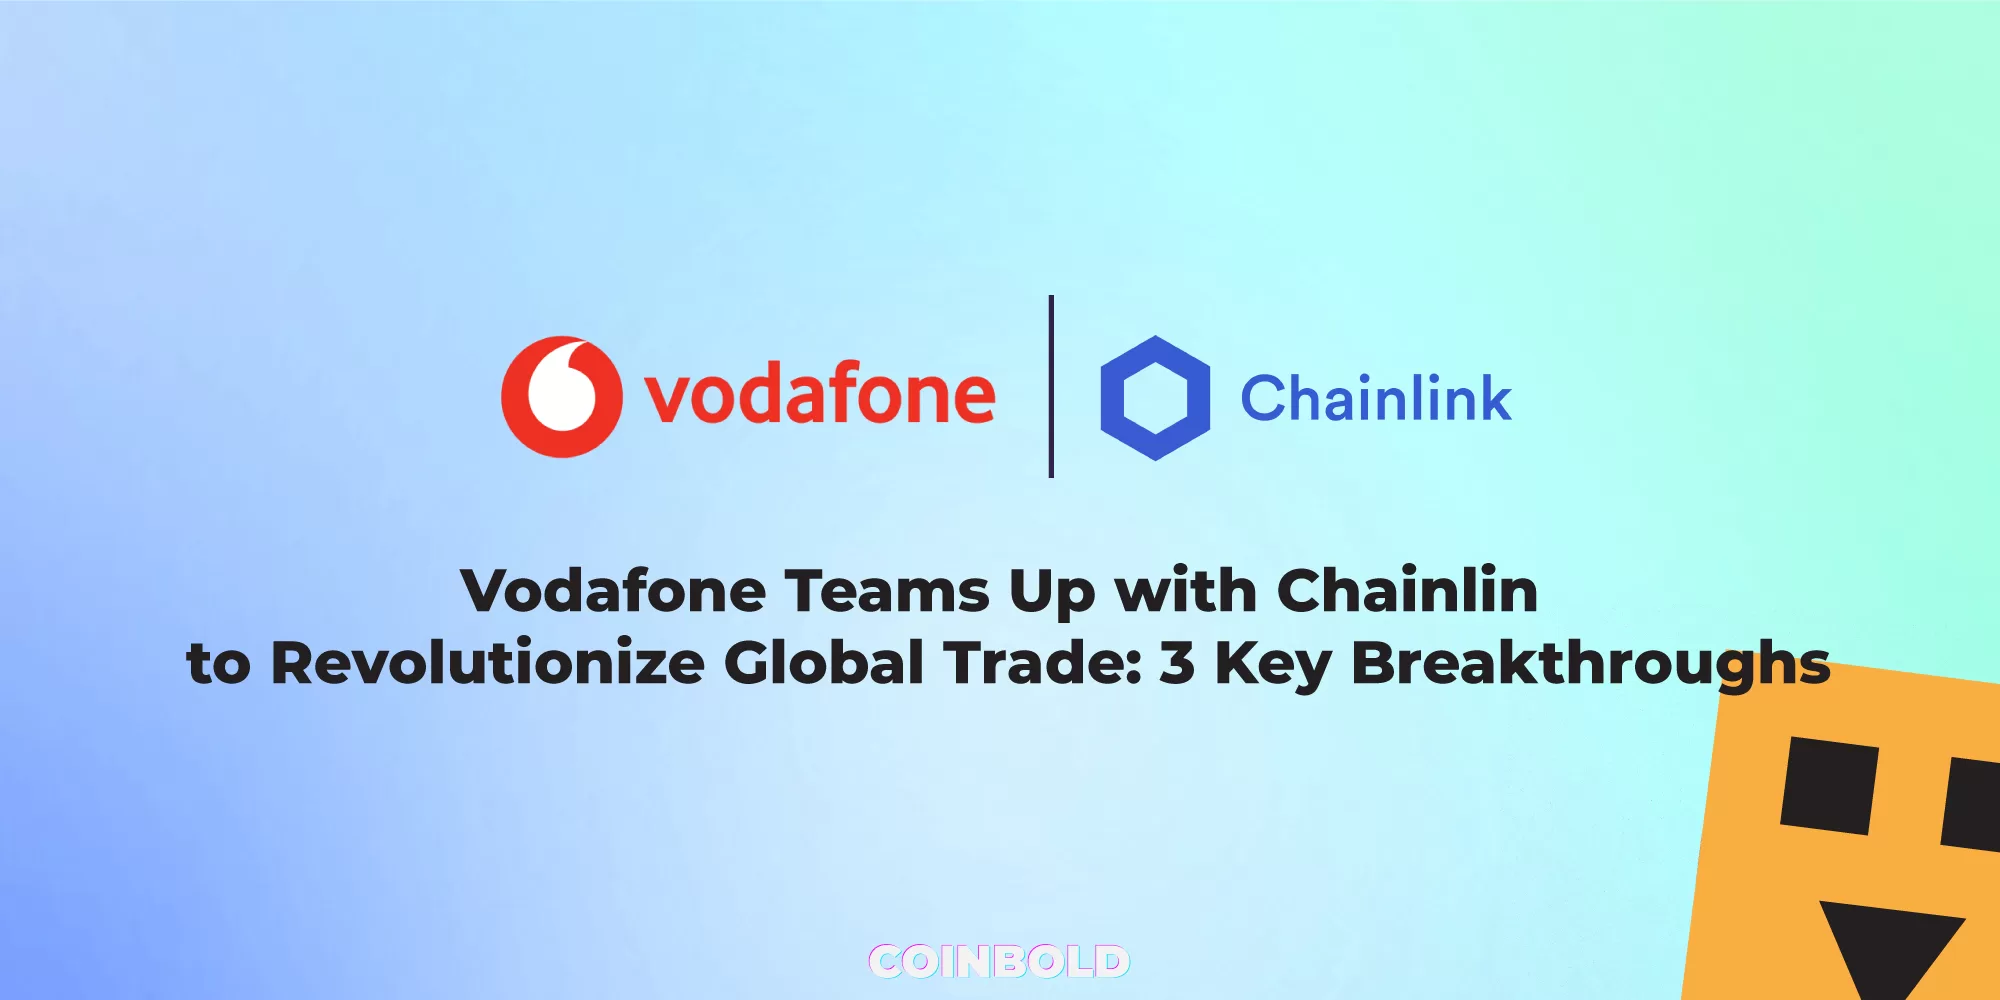 Vodafone Teams Up with Chainlink to Revolutionize Global Trade 3 Key Breakthroughs